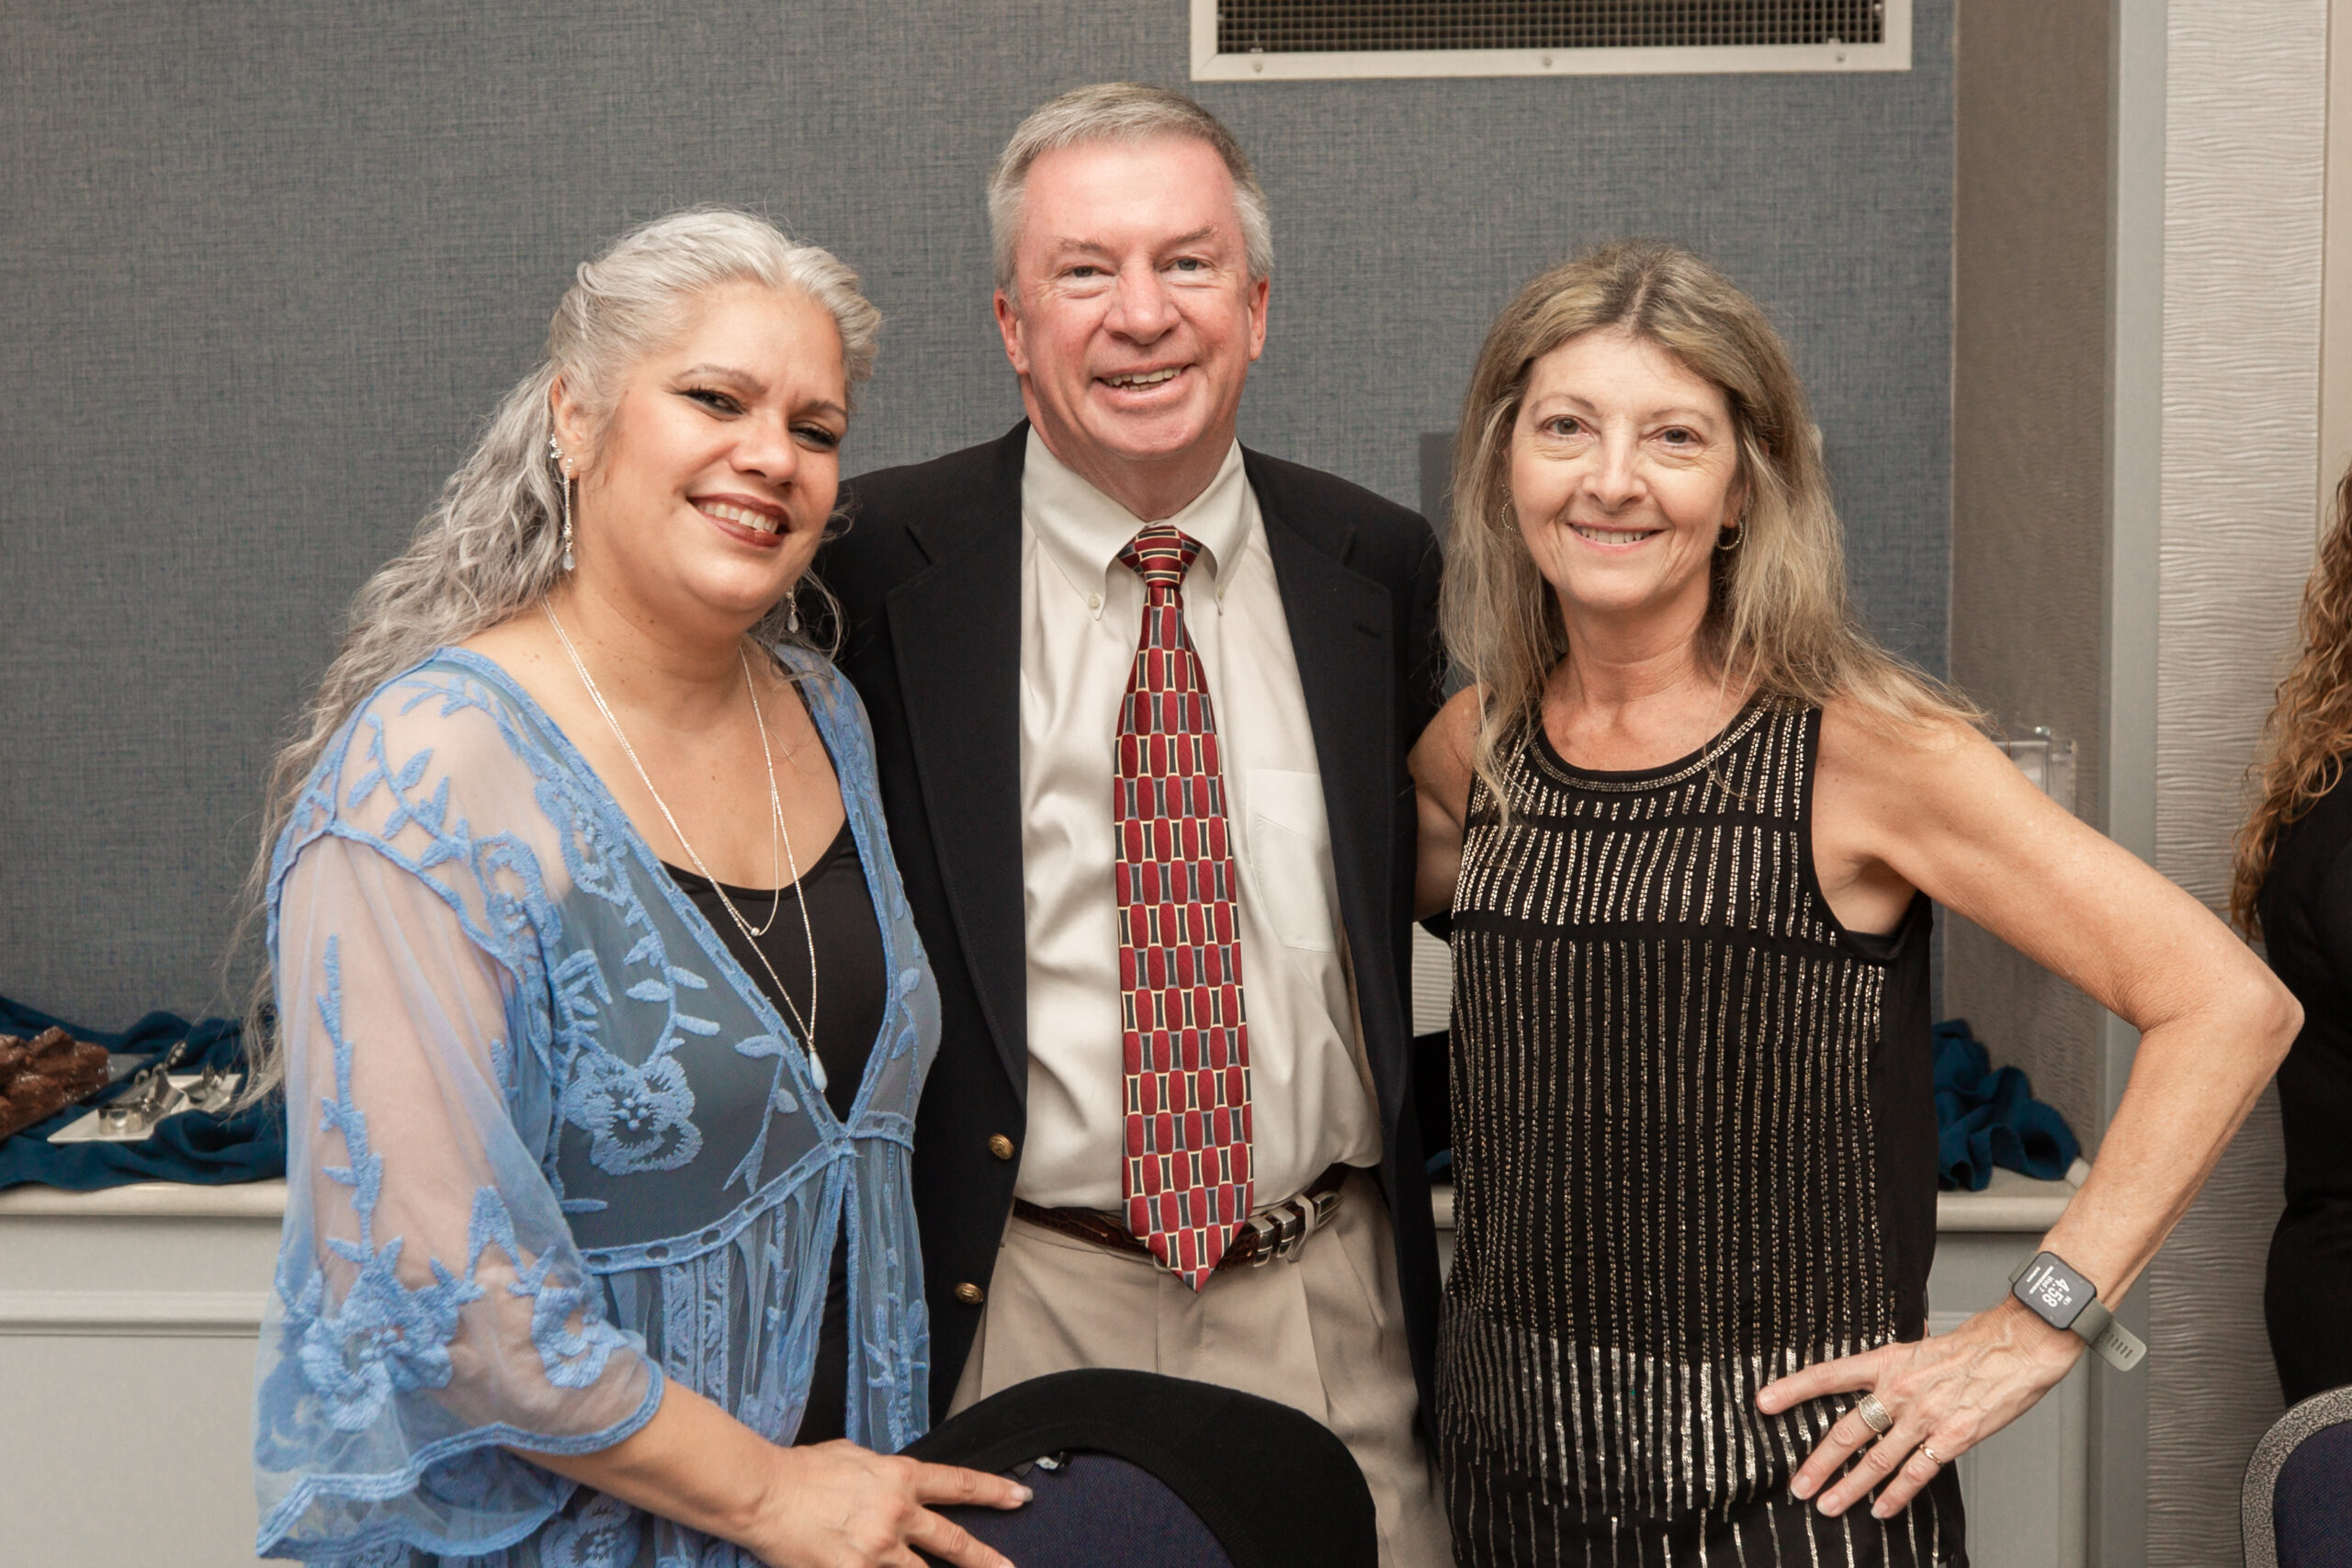 Broker-in-Charge, Jim Parker sharing his appreciation with the South Strand Office ladies, Property Manager and Realtor Lisa Melendez and Accountant Lynne Jessup